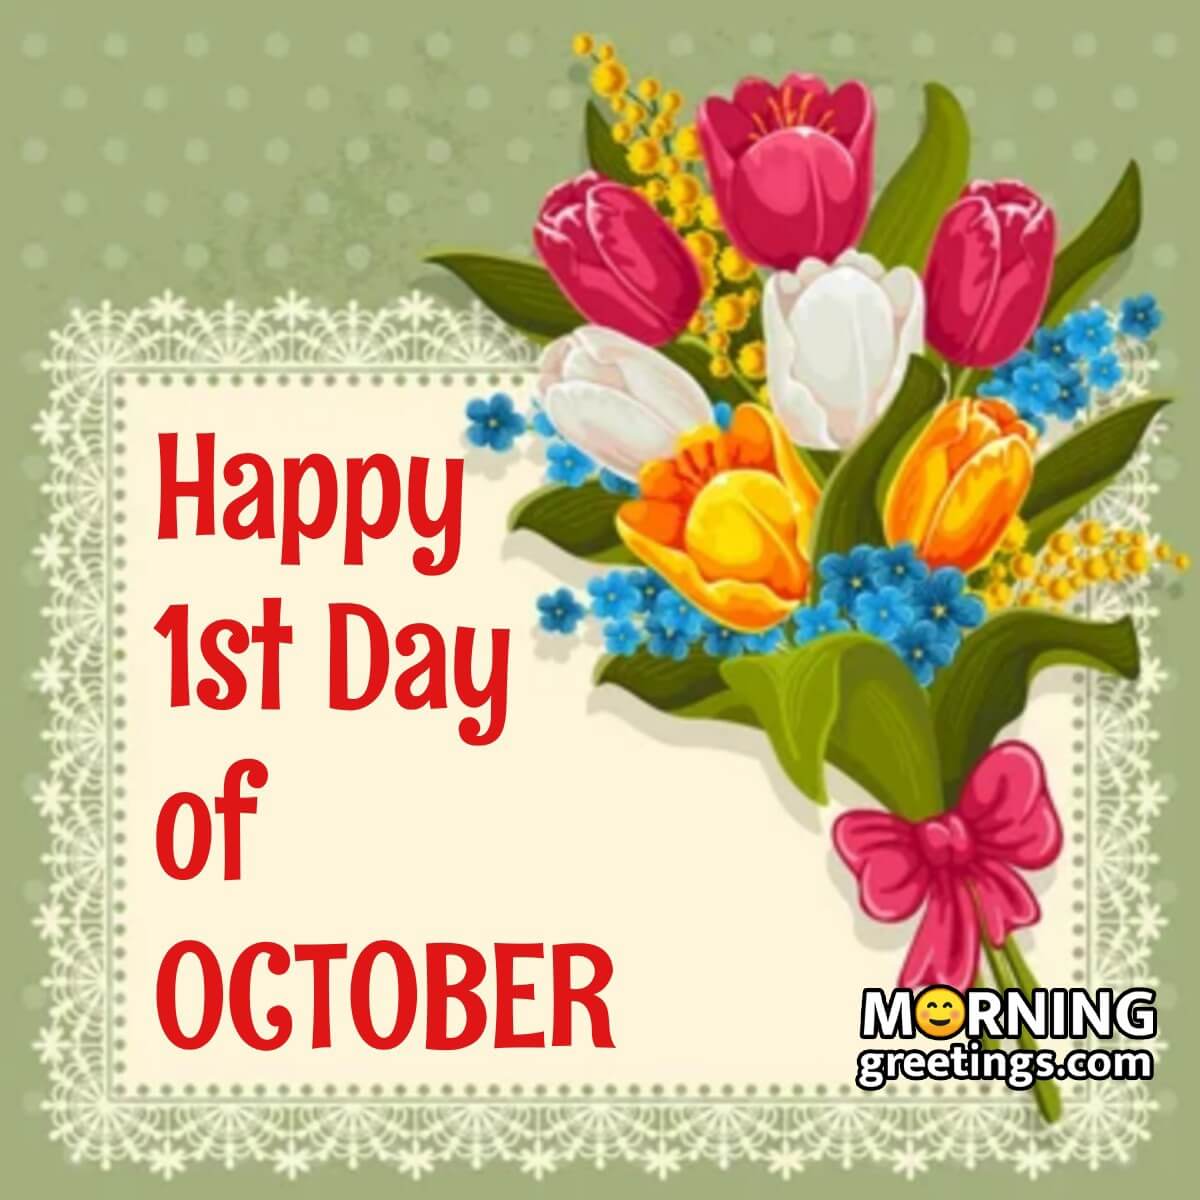 Happy 1st Day Of October Image